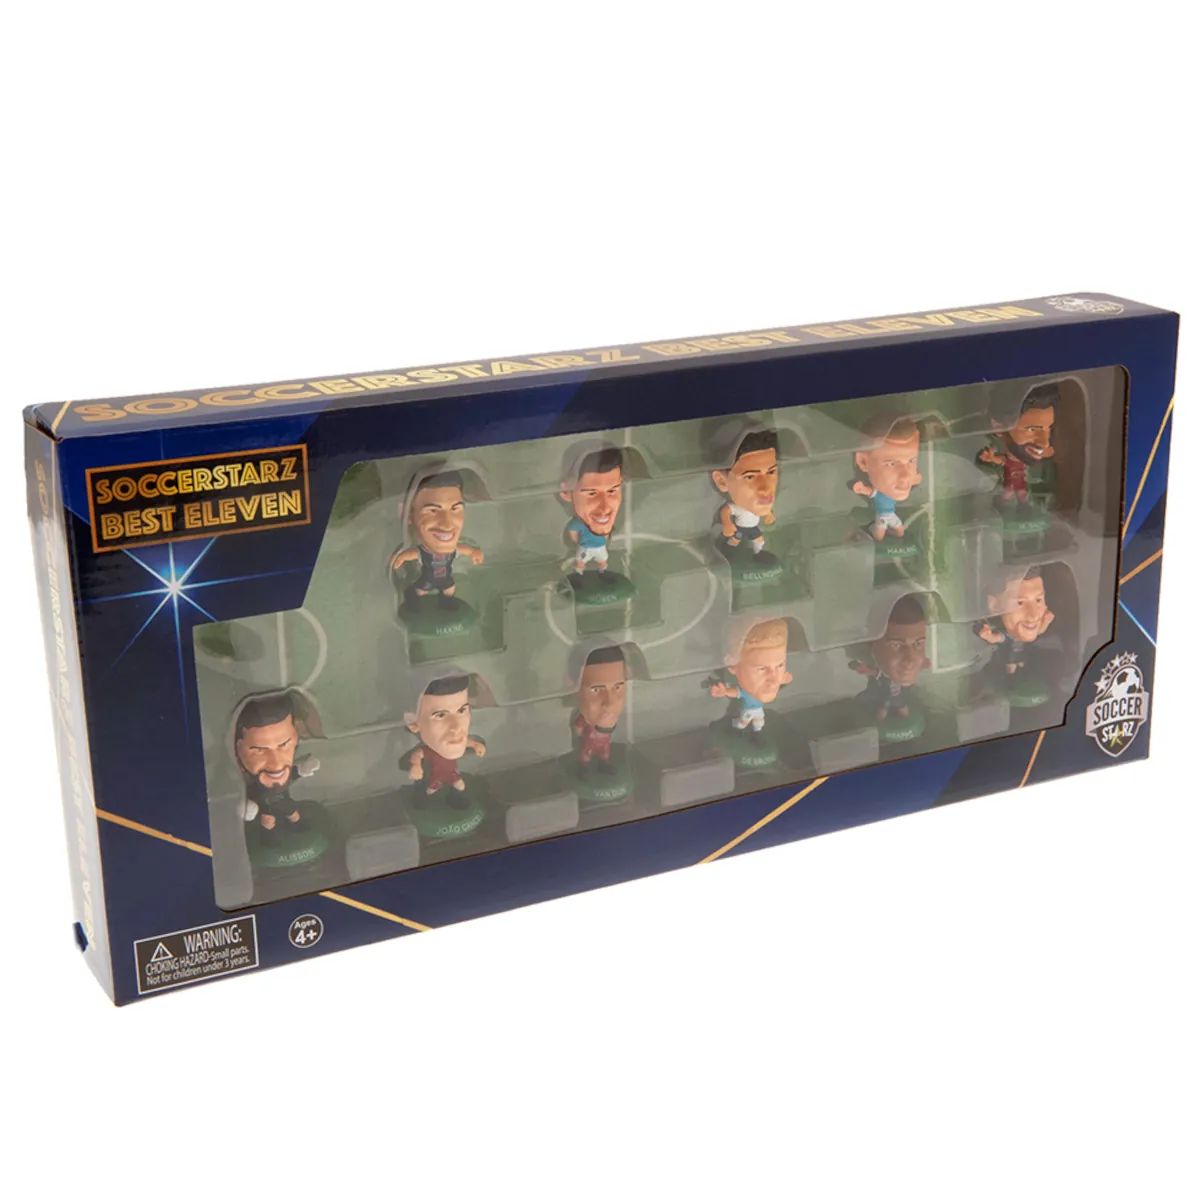 TM-03696 World’s Best Eleven SoccerStarz Special Edition Collectable Figures 2